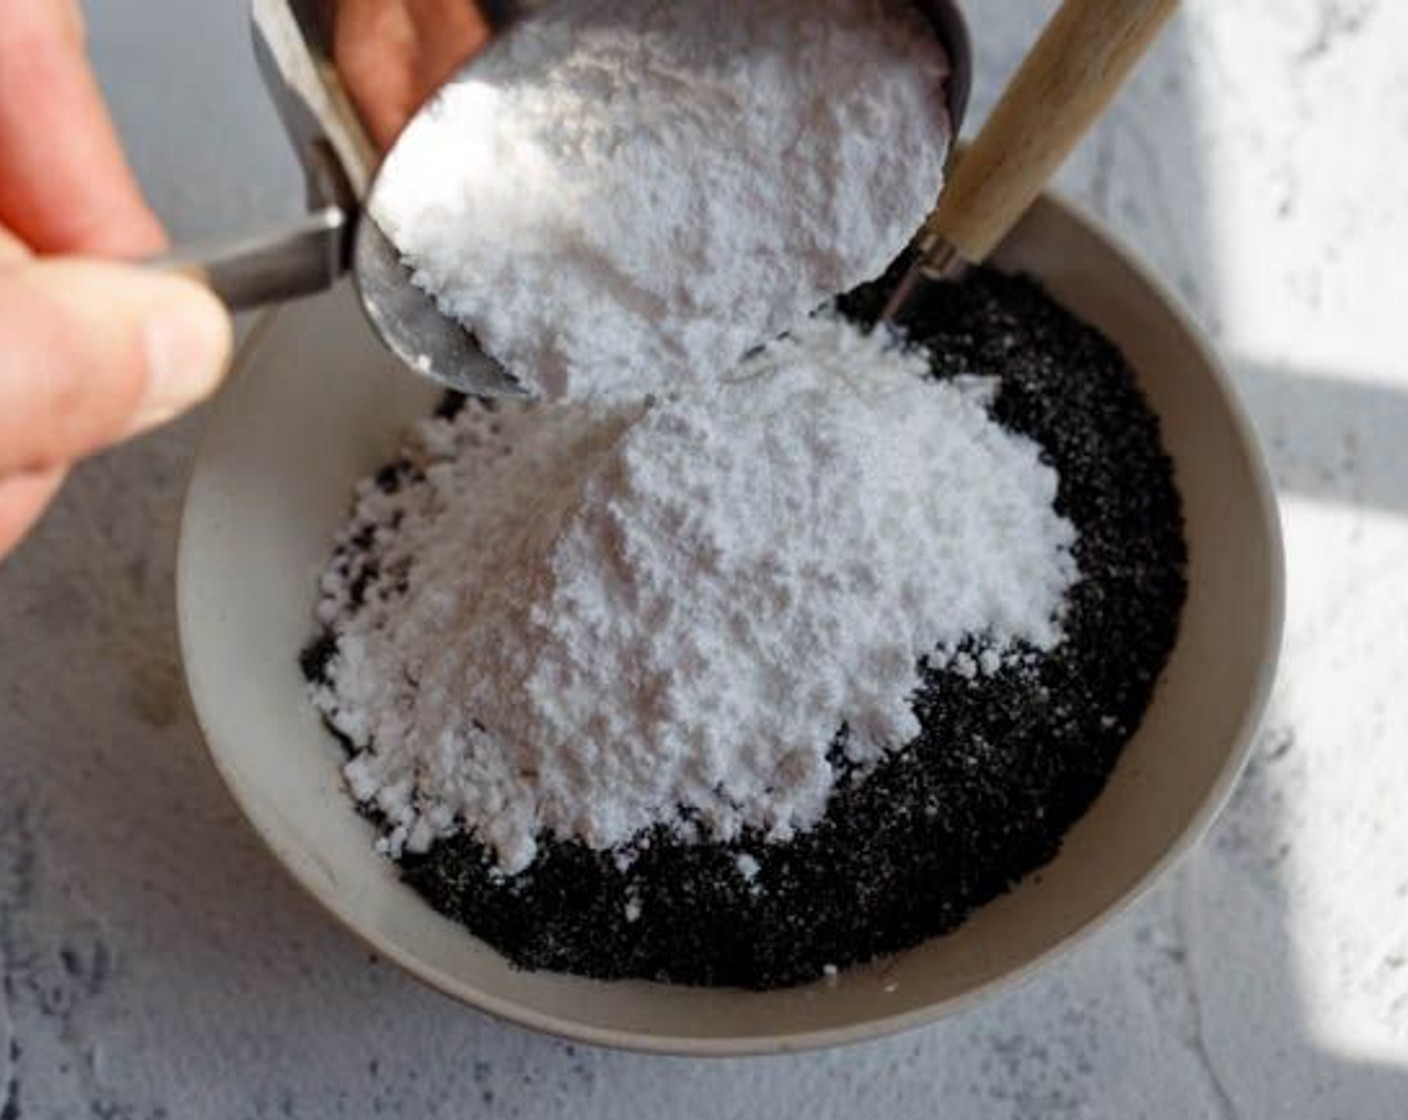 step 2 In a bowl, mix black sesame powder with Salt (1/4 tsp) and Powdered Confectioners Sugar (1 cup).